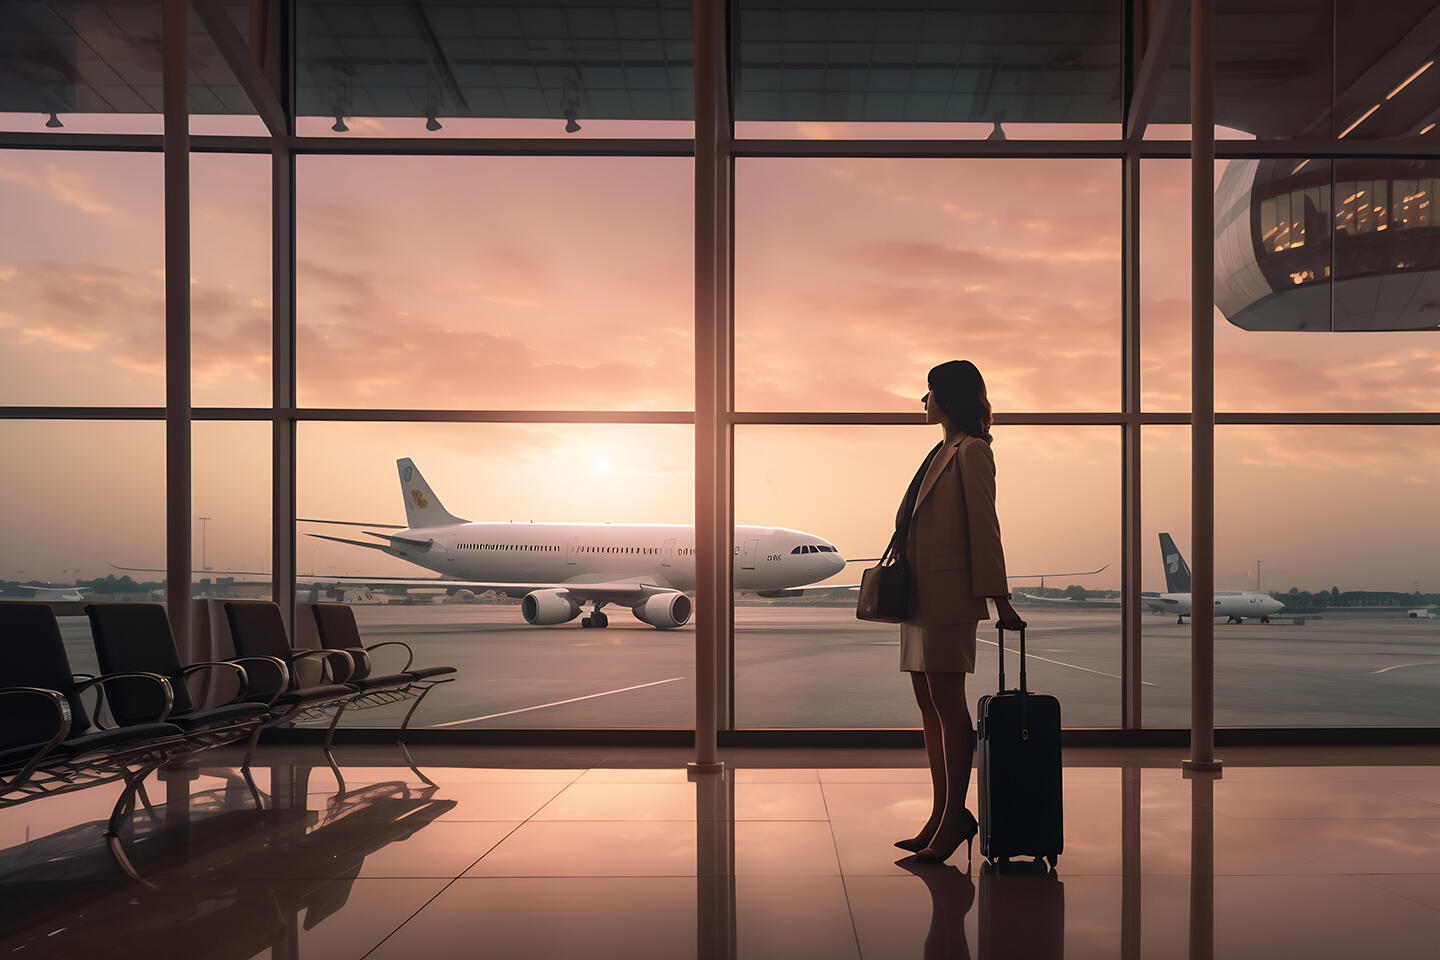 Businesswoman waiting for her flight at Paris Charles de Gaulle Airport, suitcase by her side, view of planes at dusk through the terminal windows.